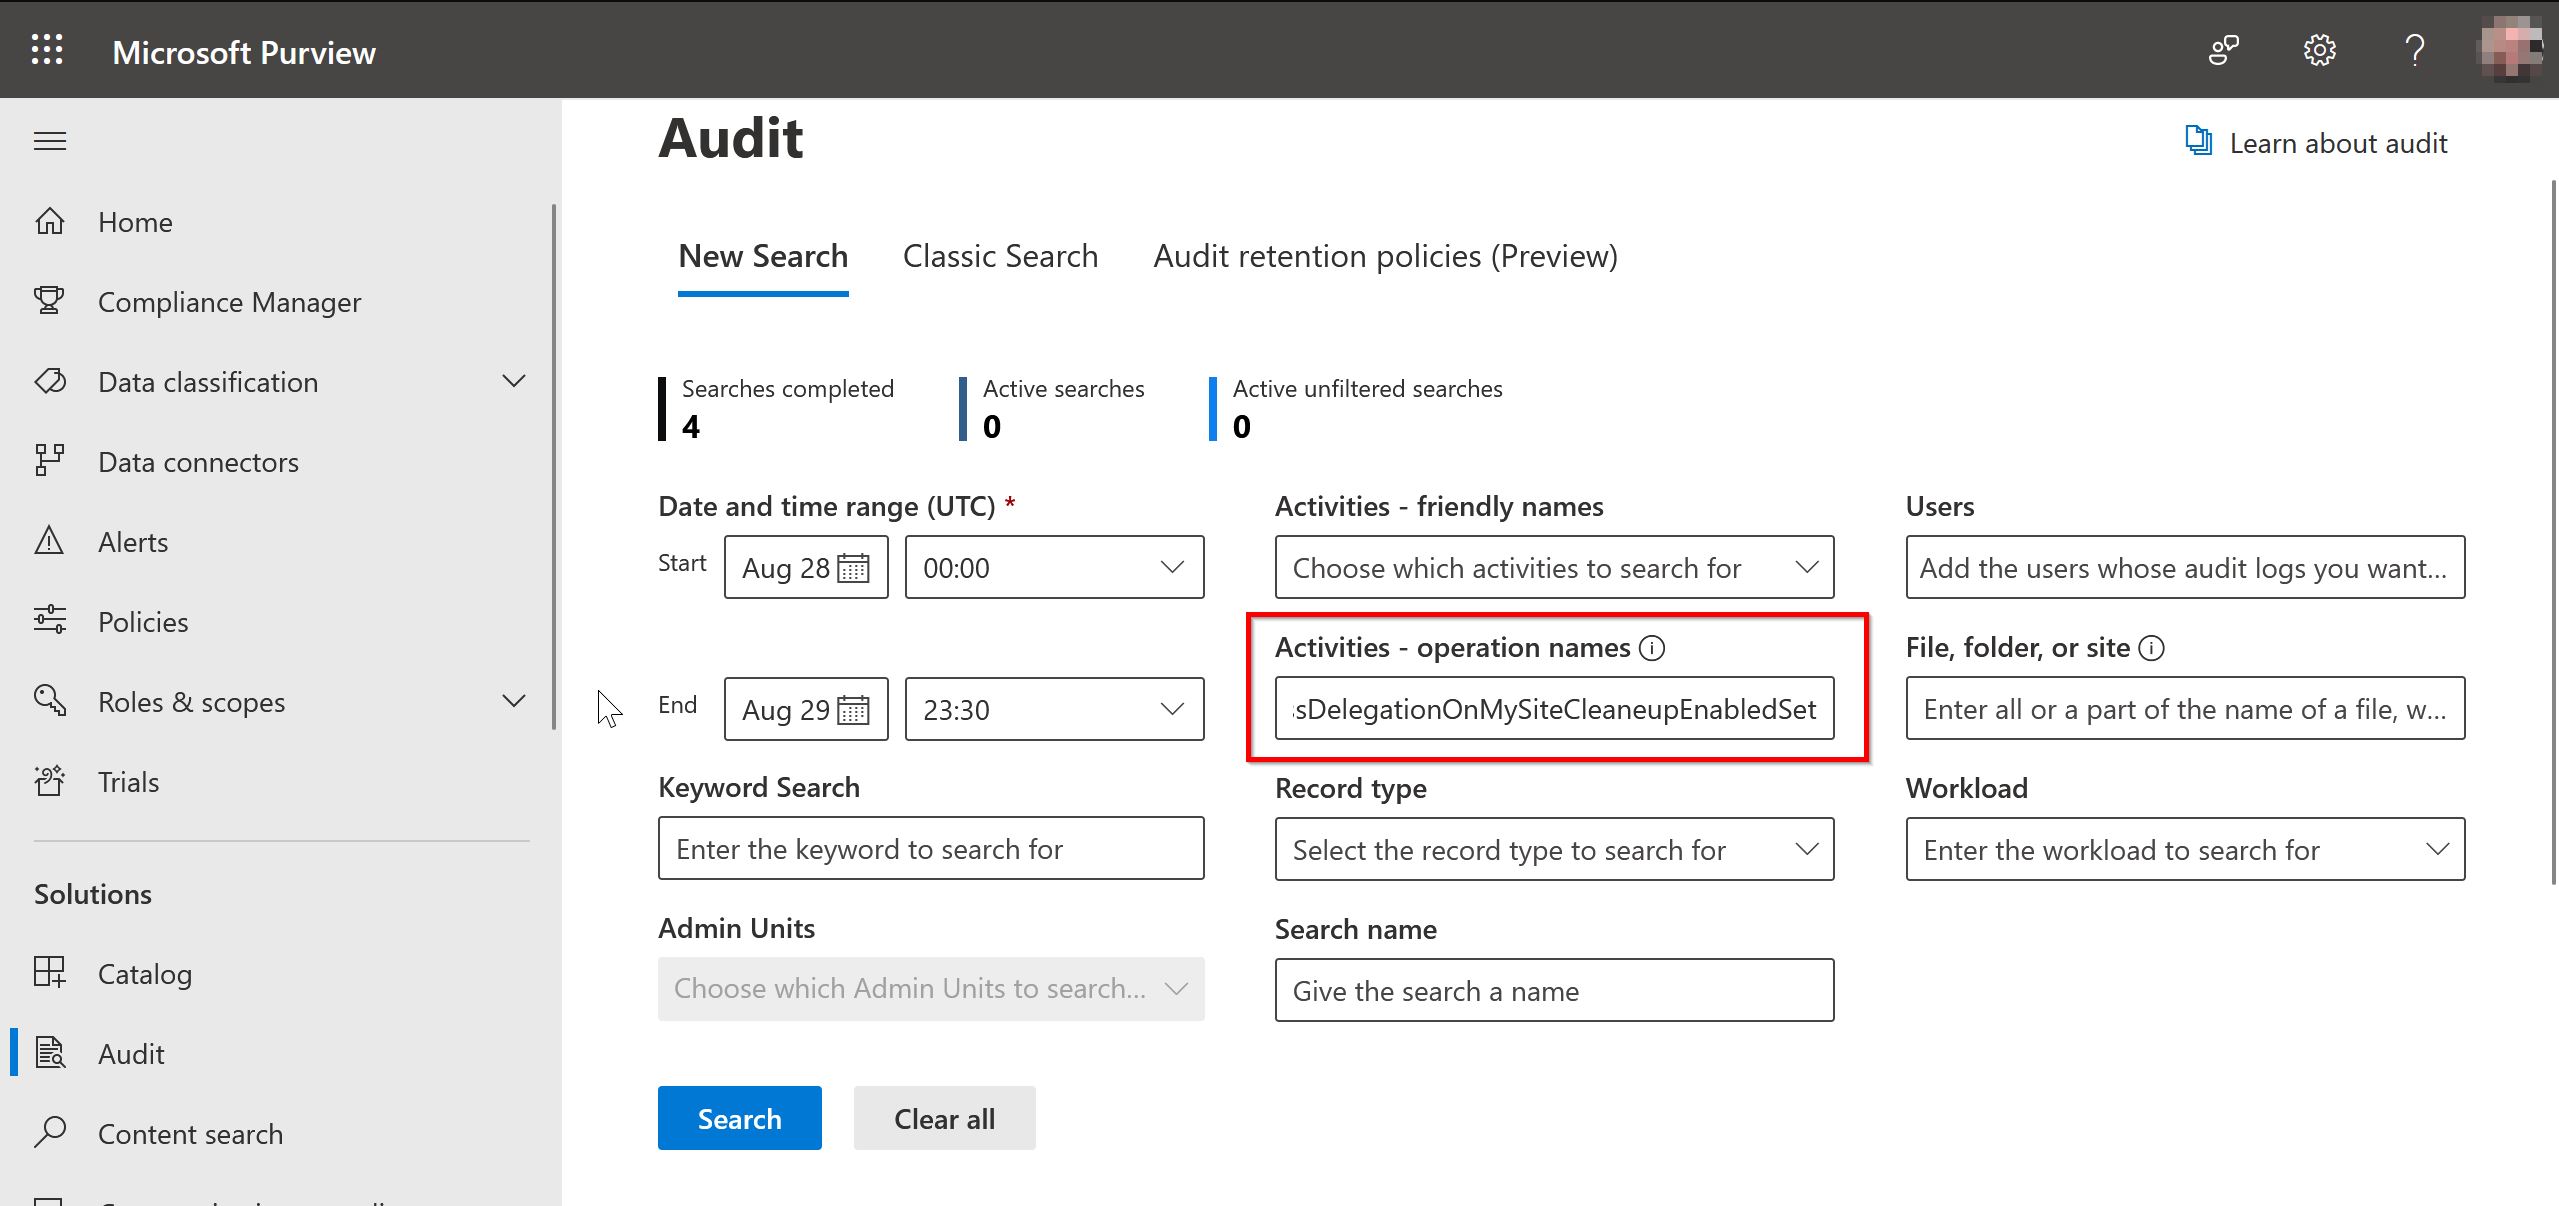 Search the M365 Audit Log for SharePoint Online - My Site settings - Cleanup - Change events